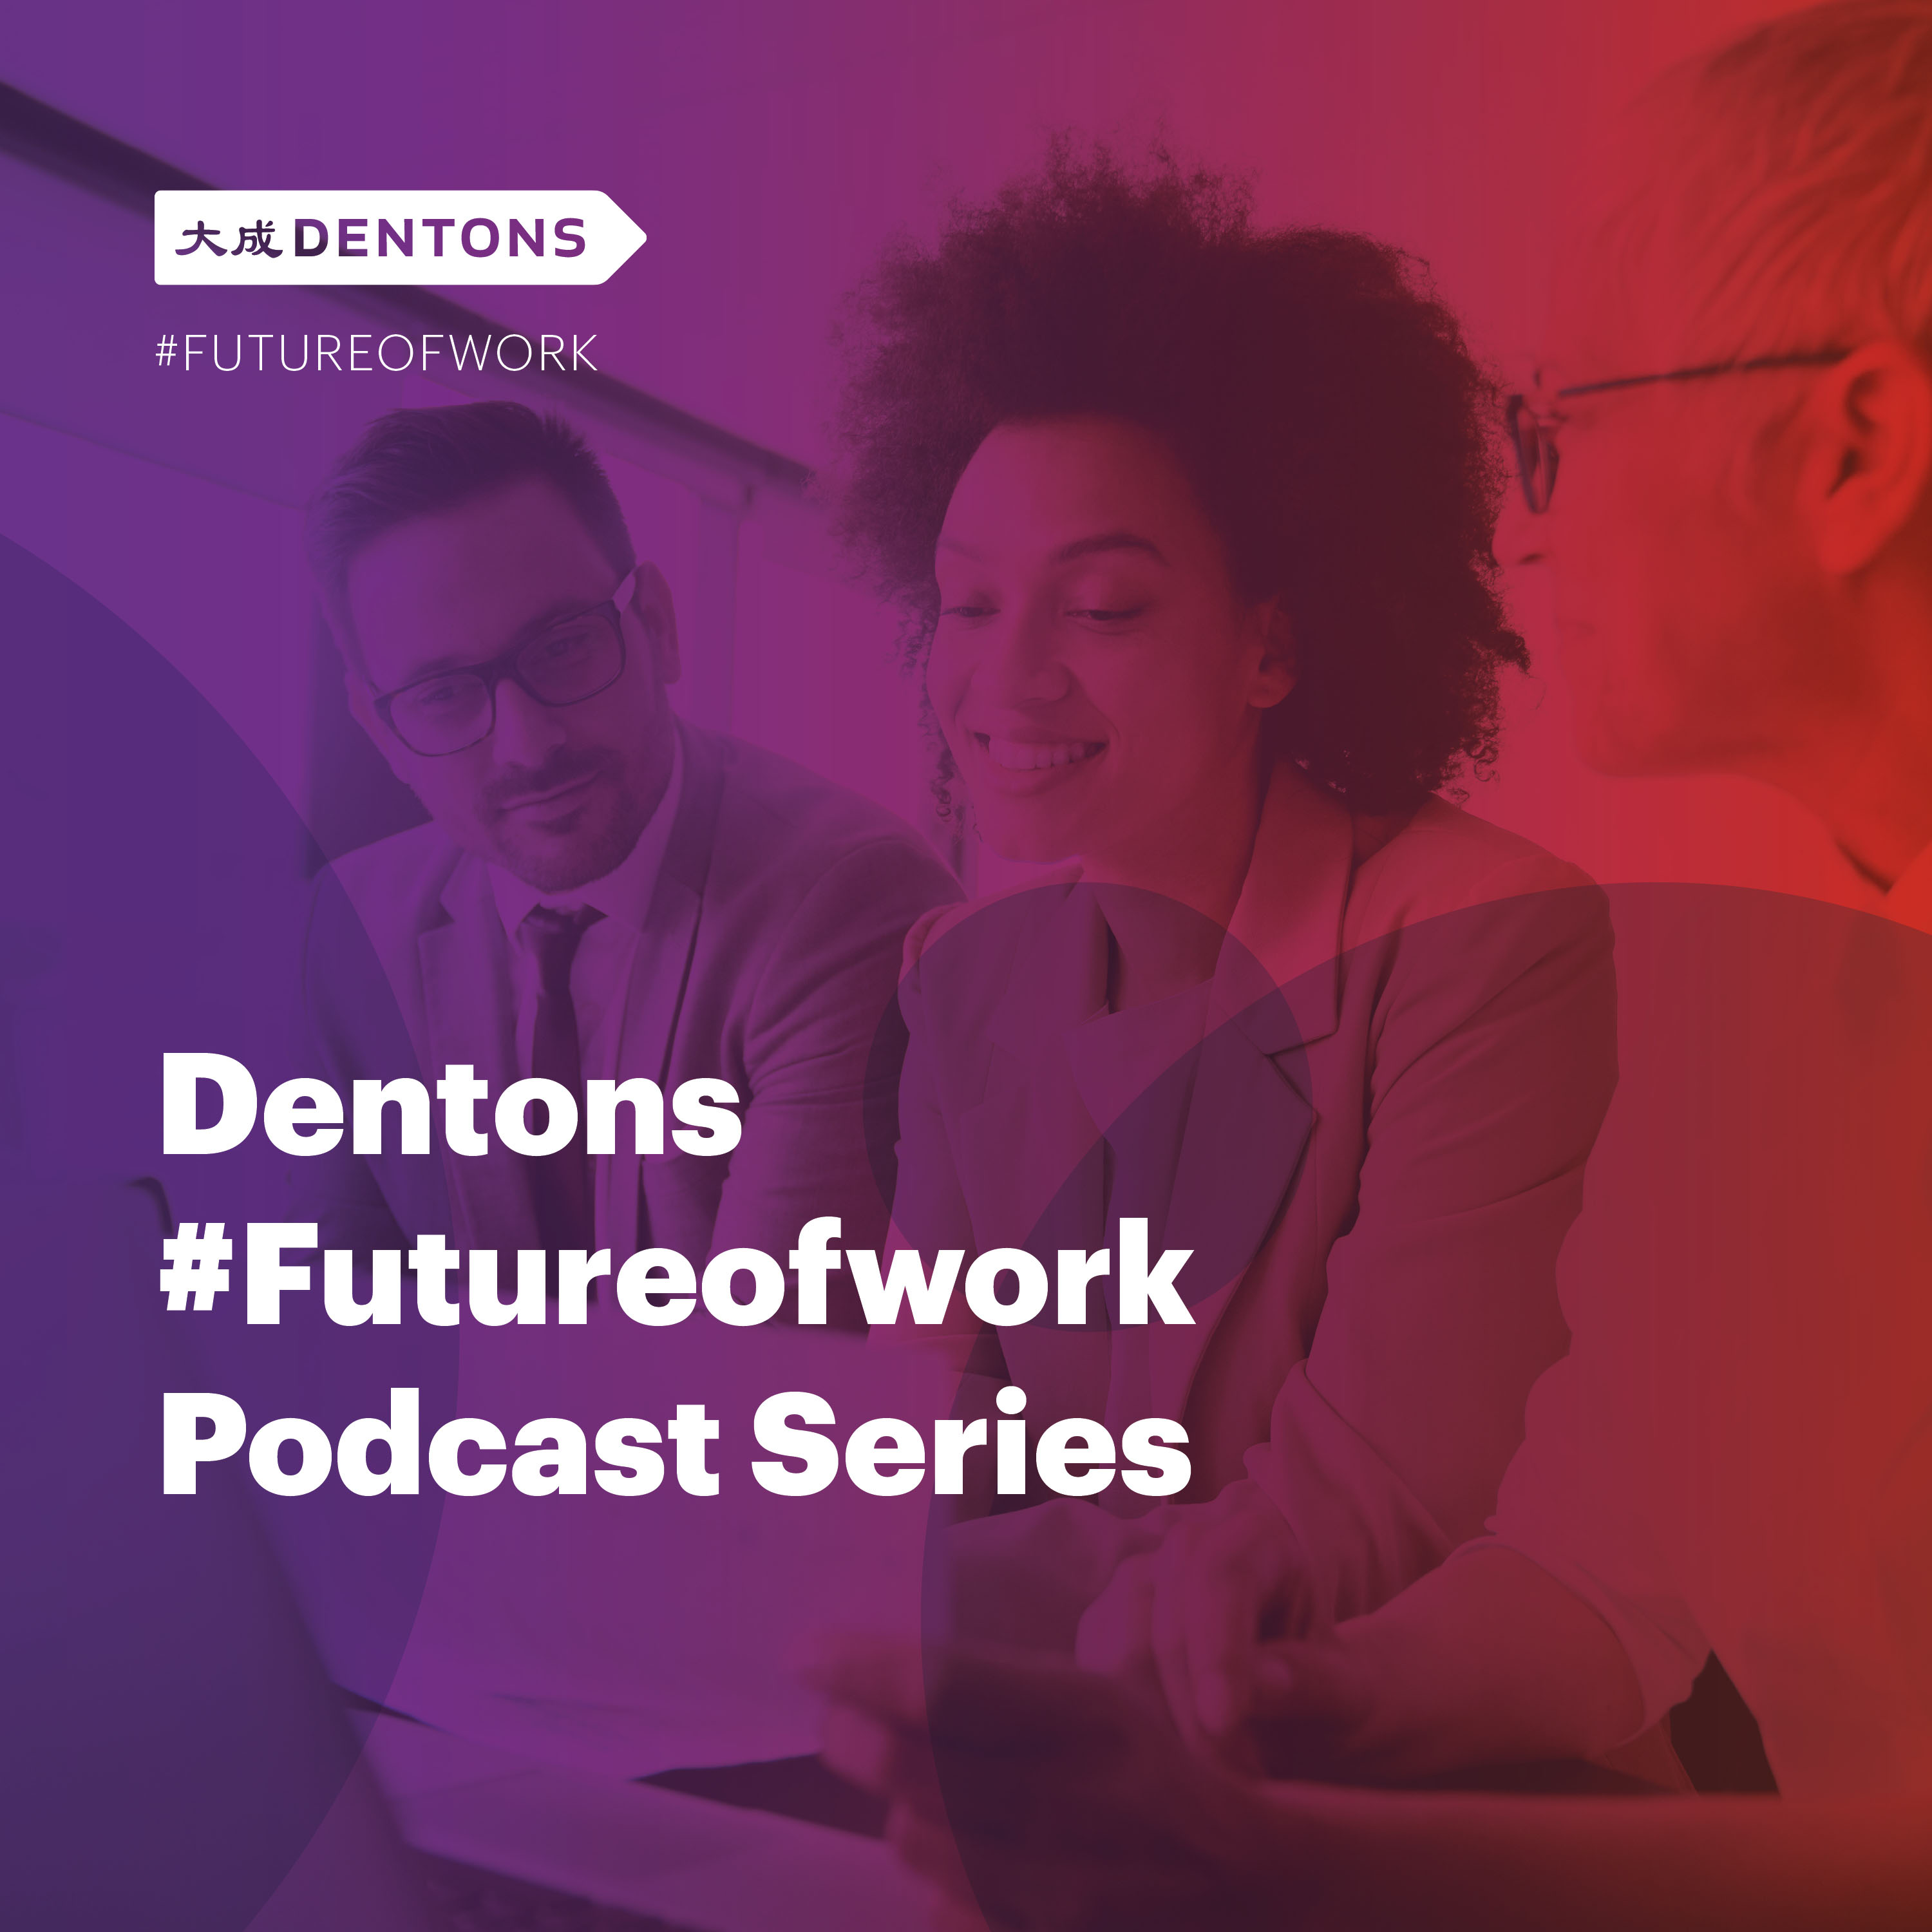 Future of Work podcast series